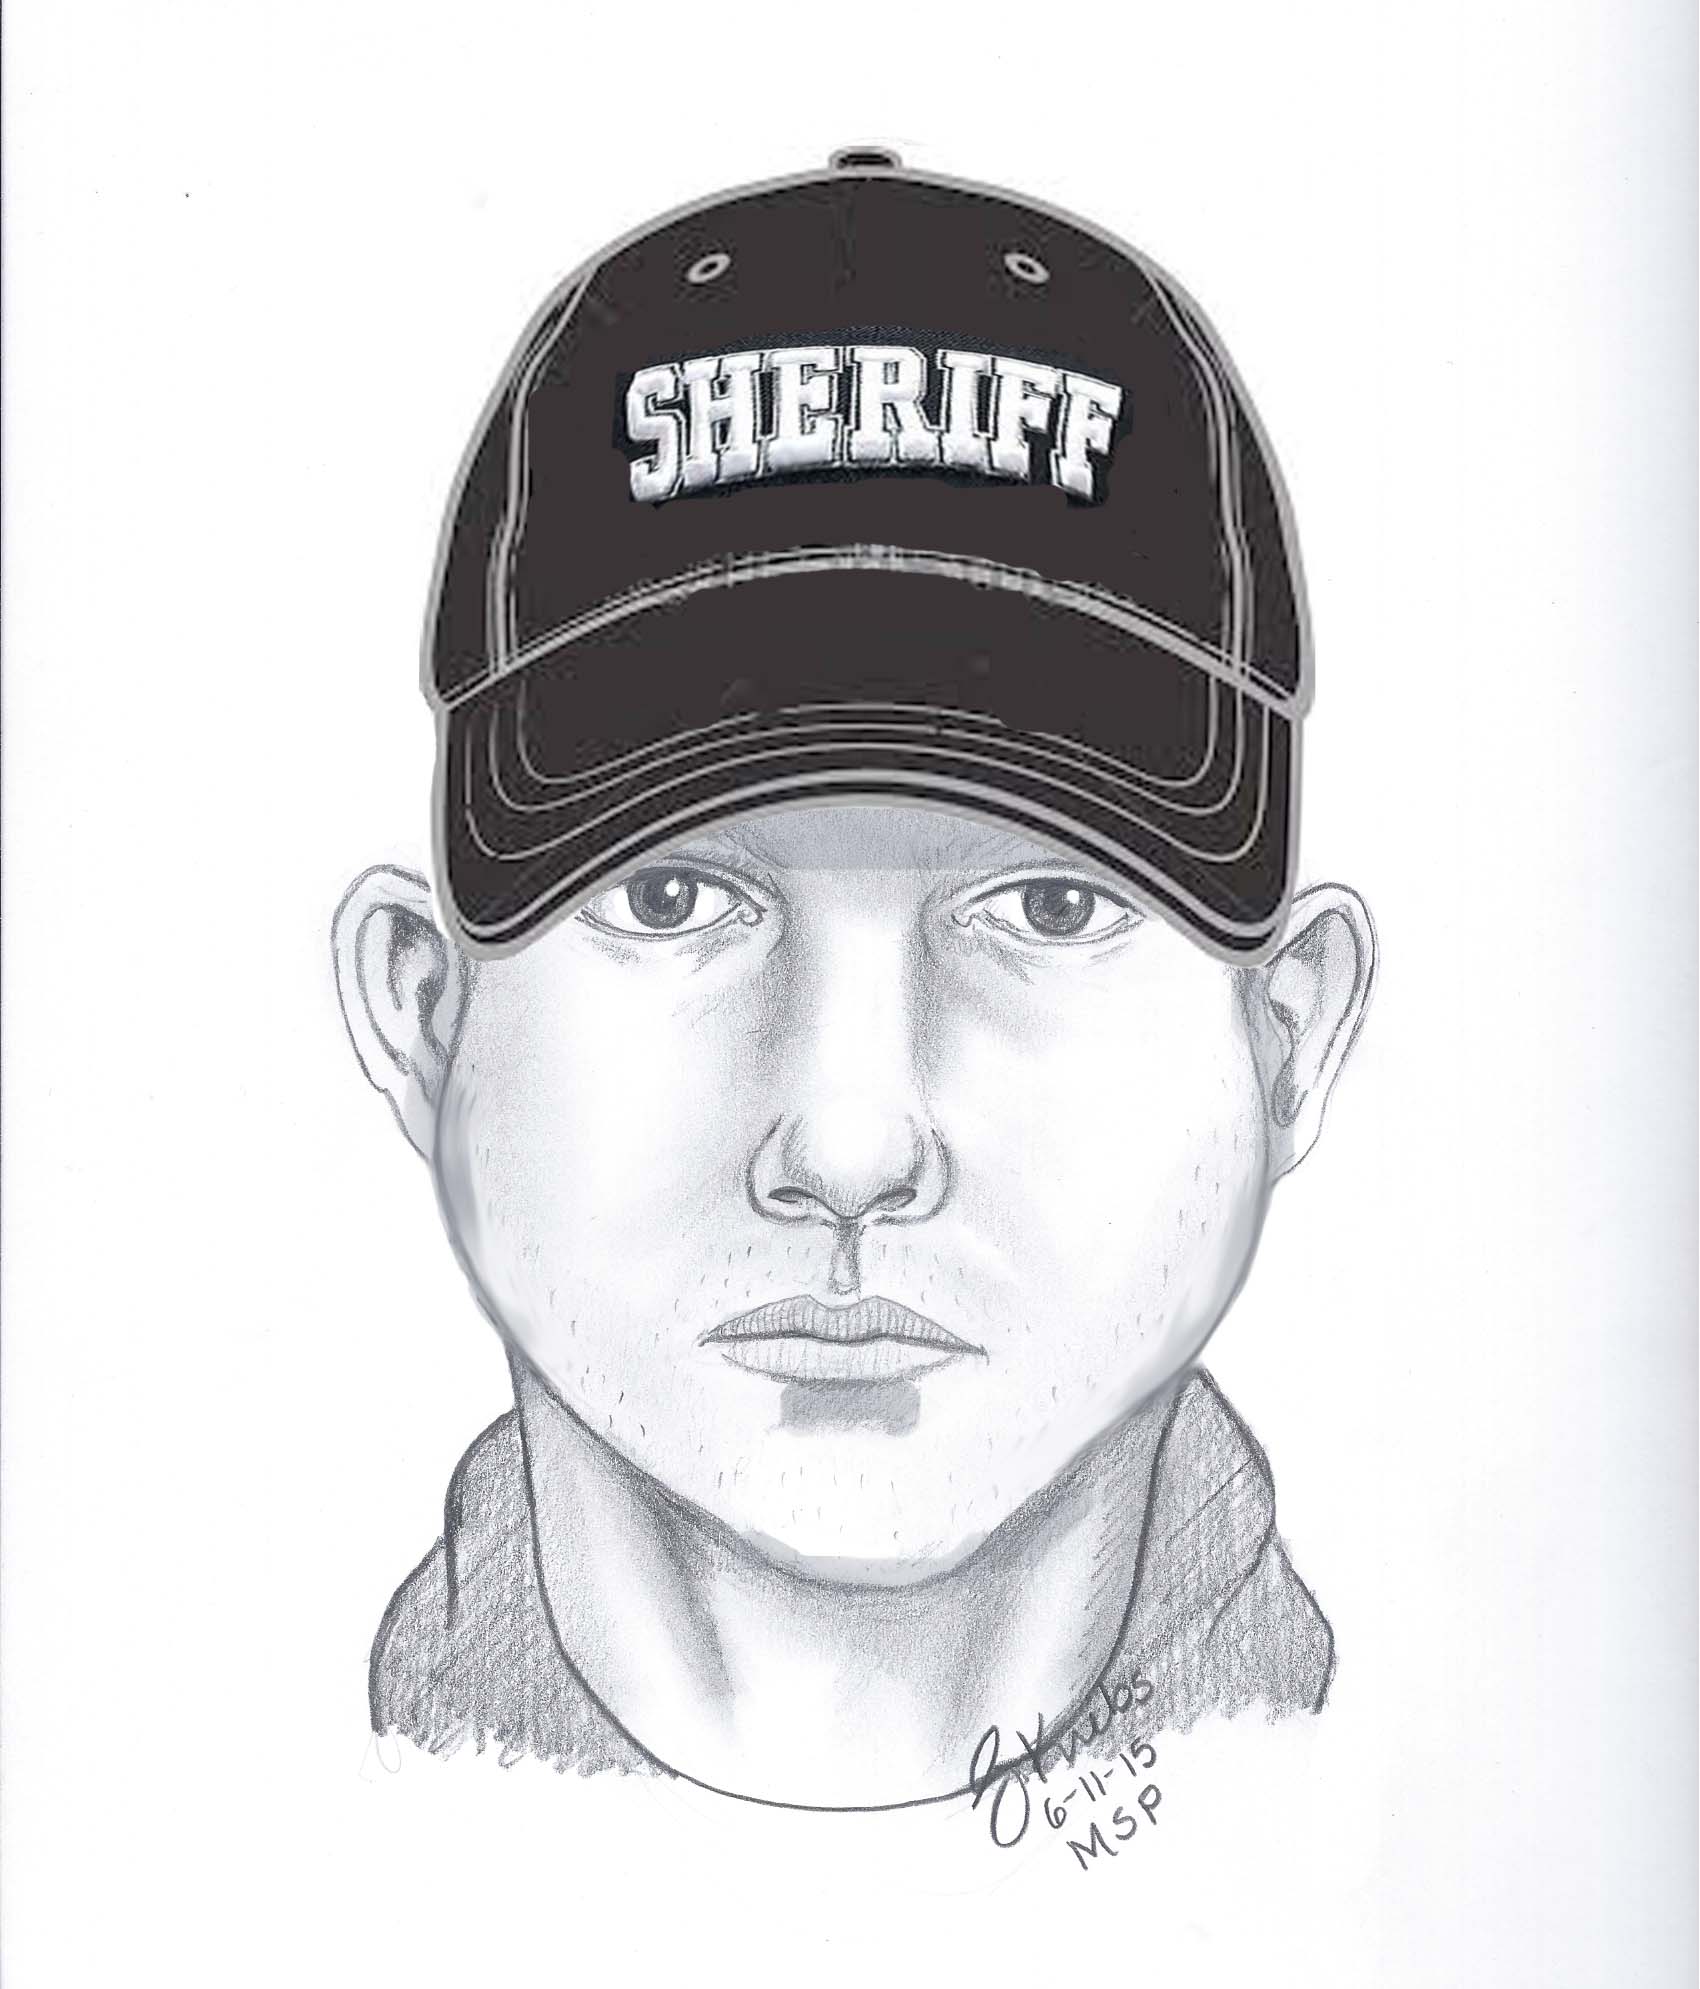 Oakland County Sheriff’s Office releases sketch of man impersonating police officer